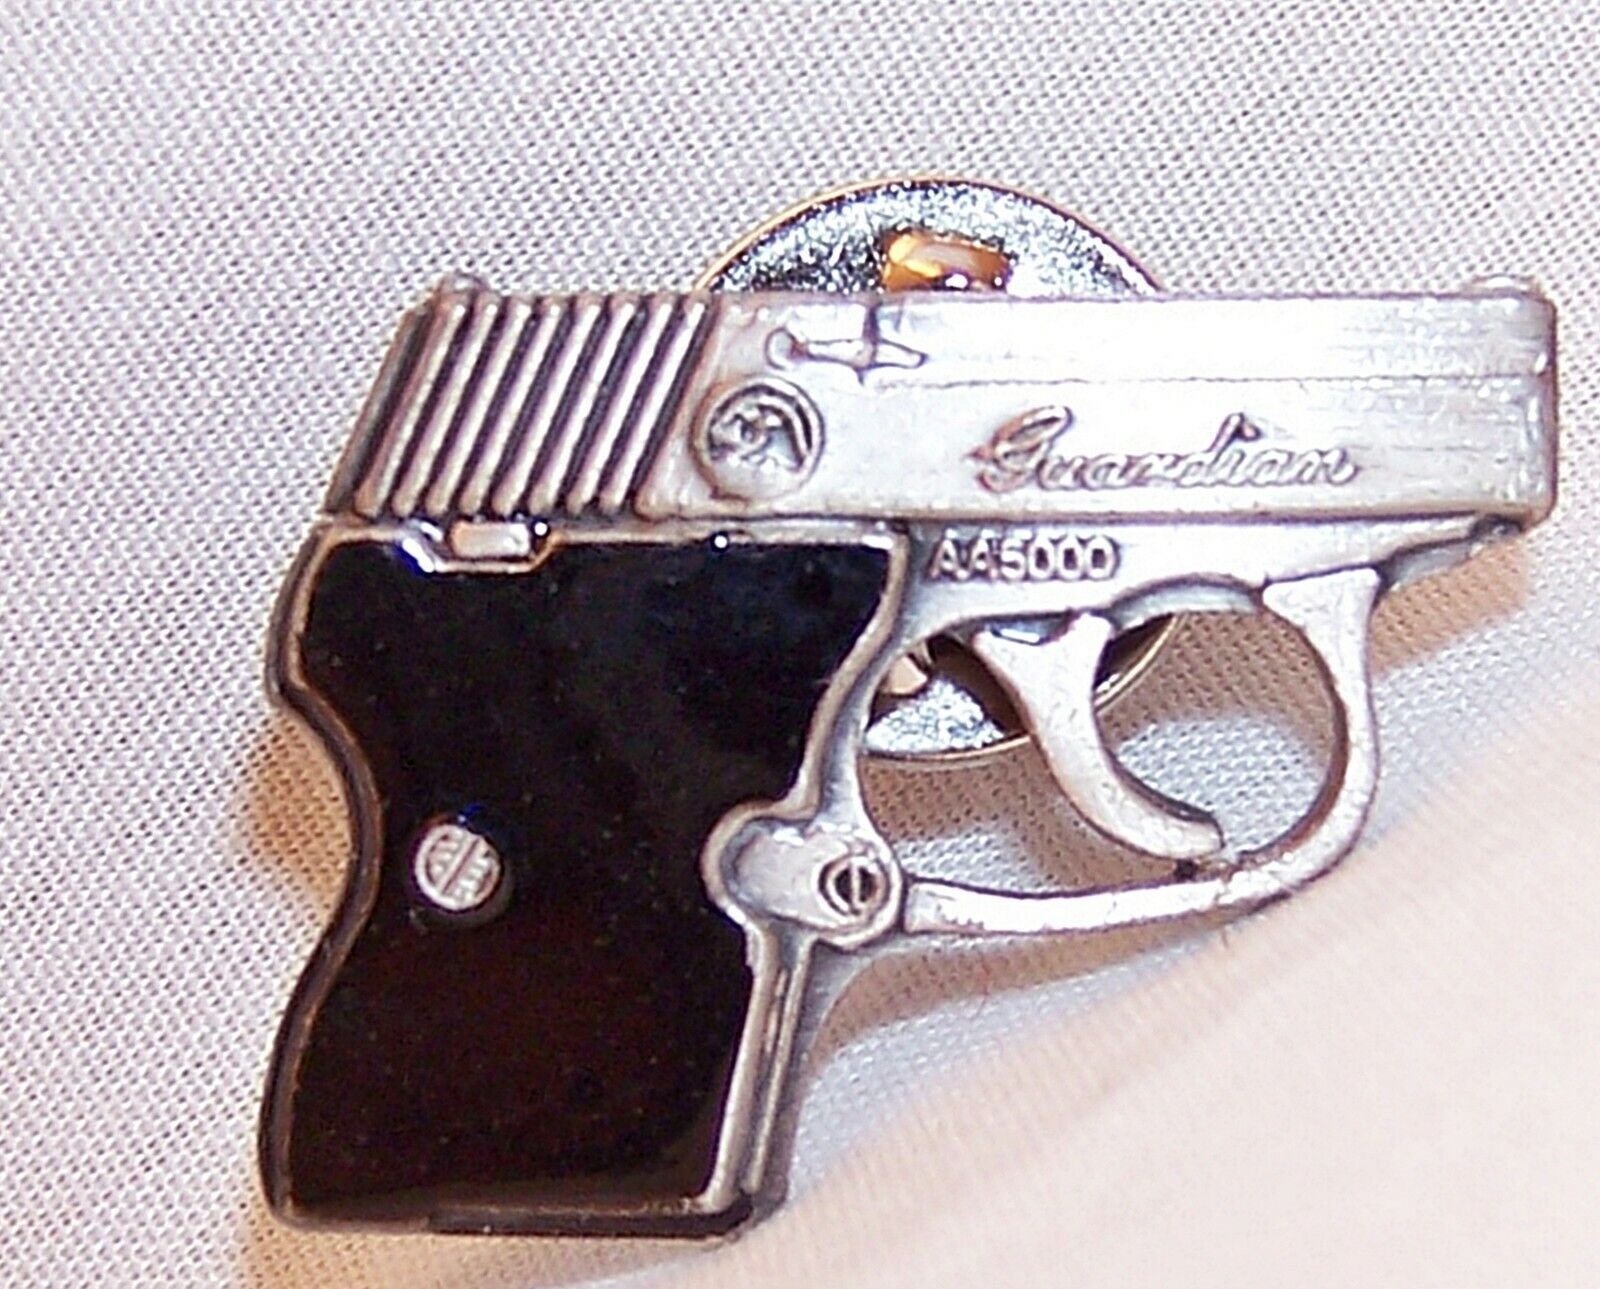 Guardian Pistol Hat Pin Lapel Pin Trading Tie tac 380 32 North American Arms D15